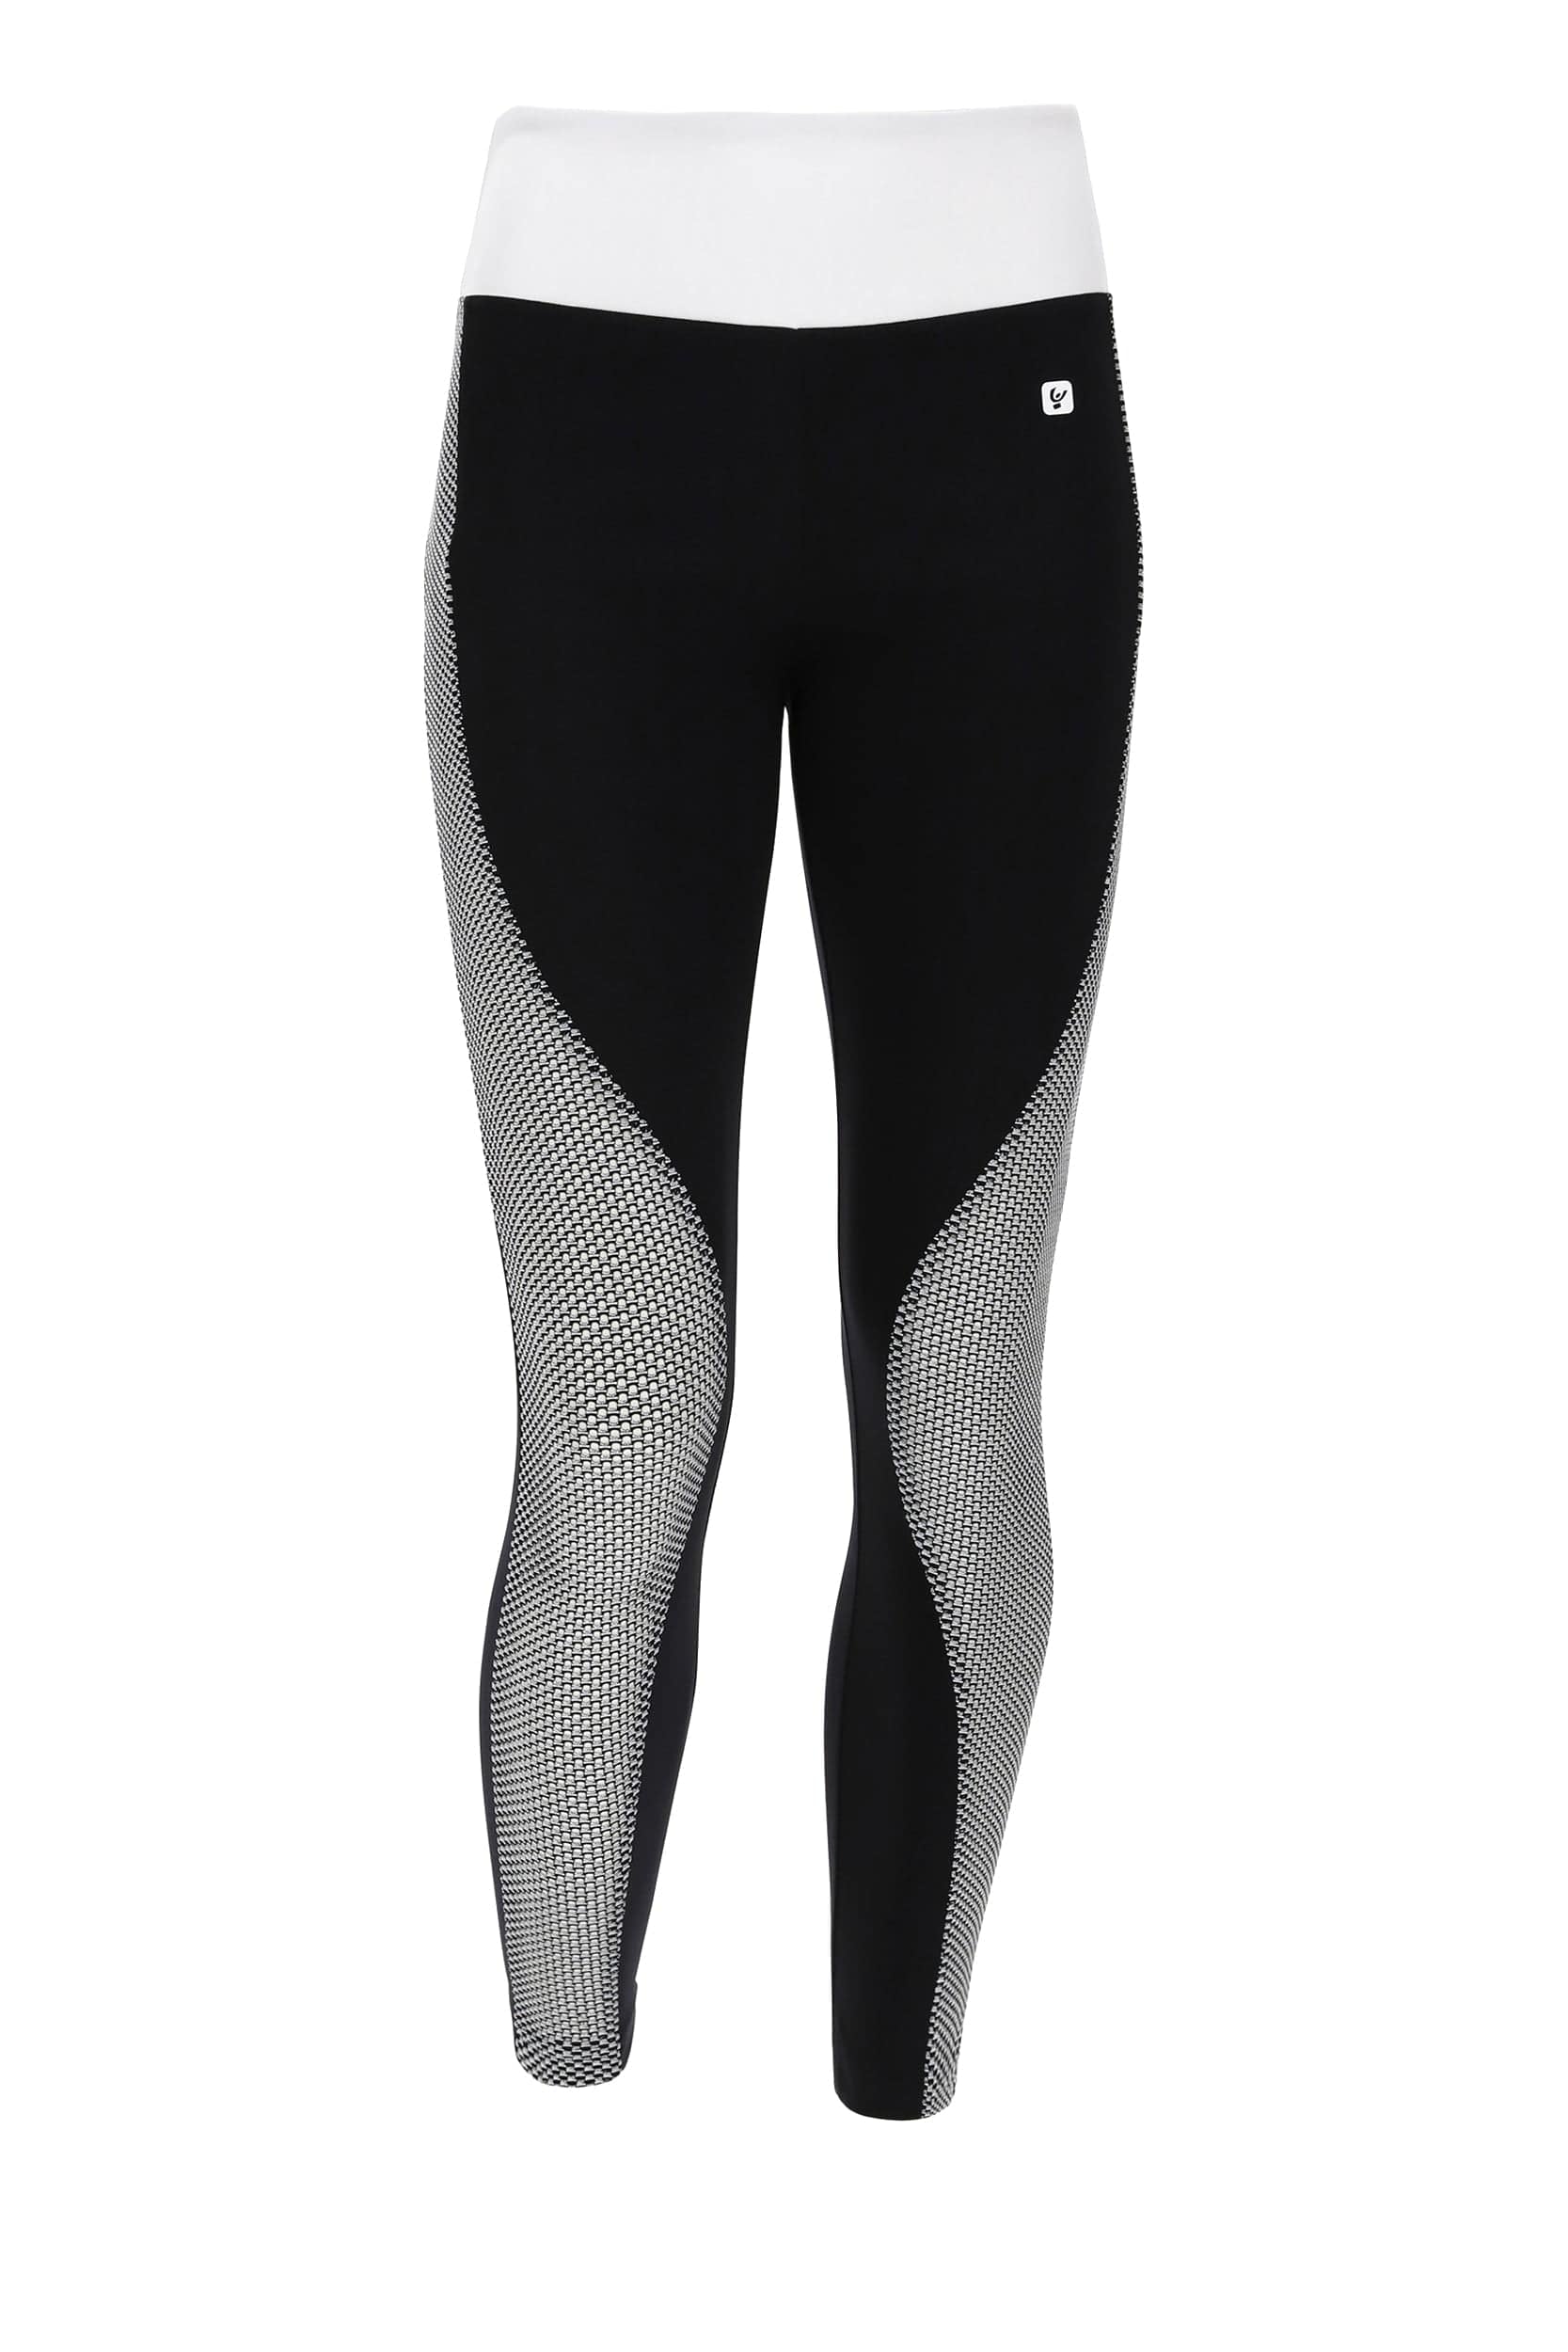 SuperFit Activewear - Mid Rise - 7/8 Length - Black + White Pattern 2